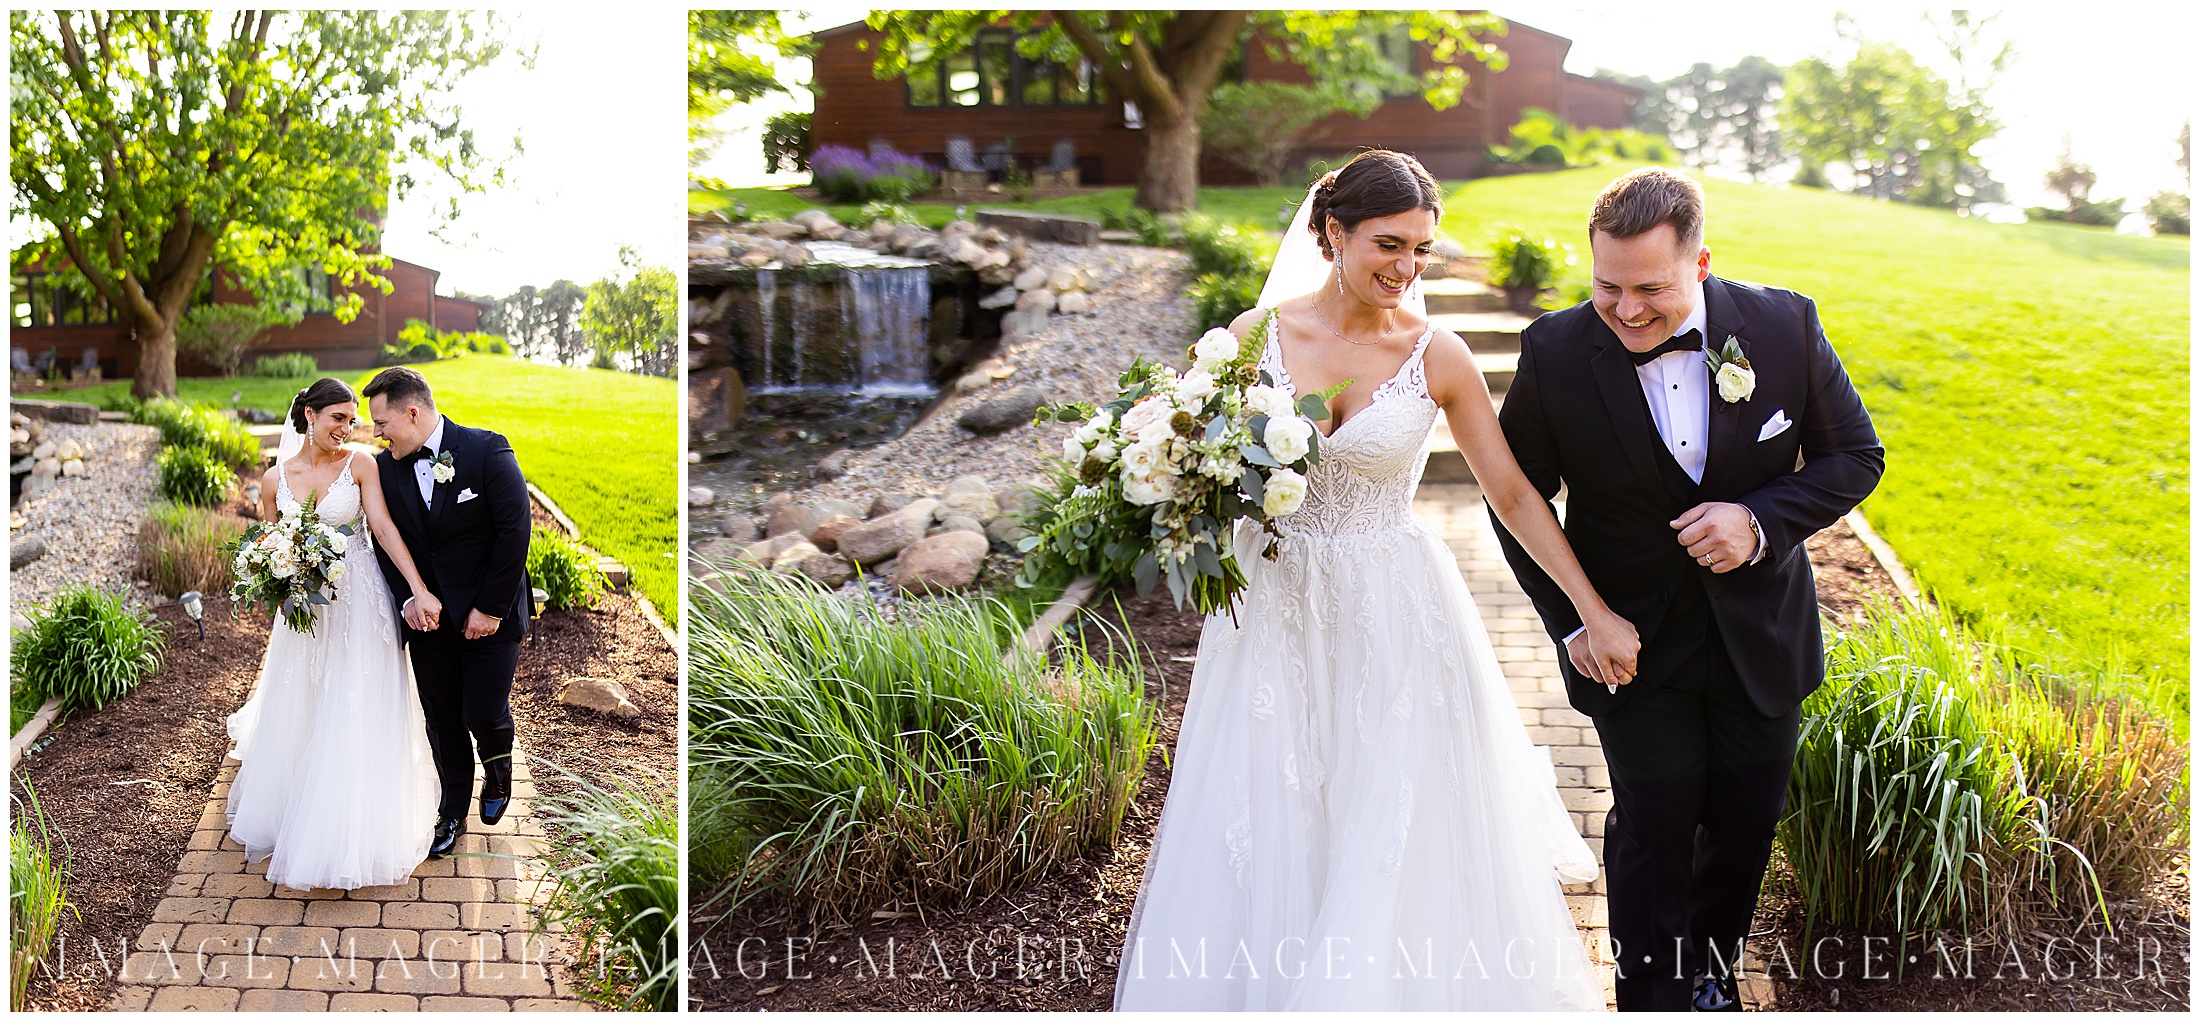 rich true to life wedding photographer midwest destinations budget friendly